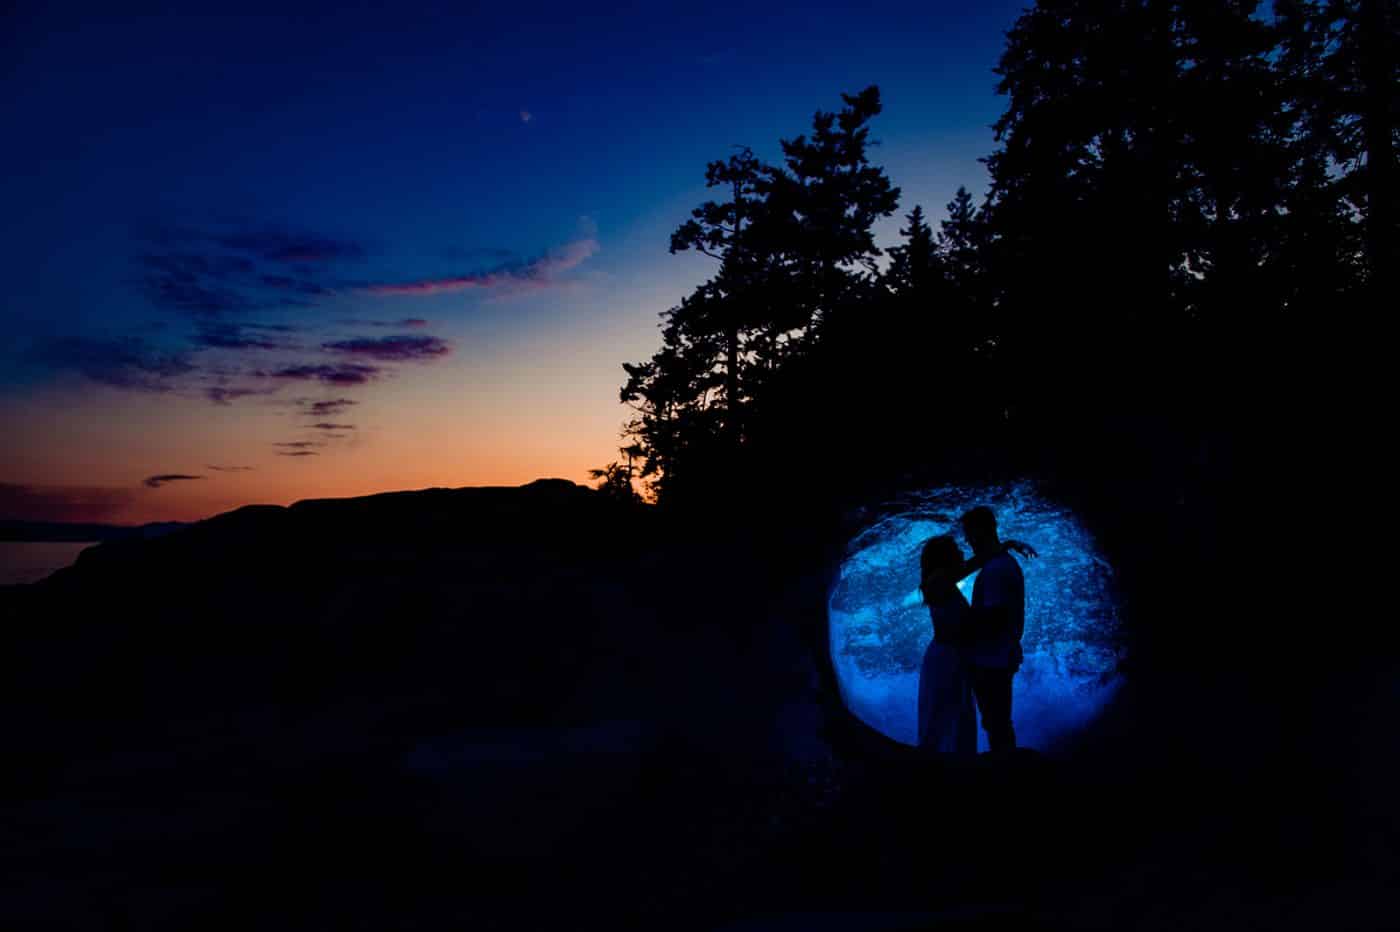 man and woman stand spotlighted in silhouette against a rock with the sun setting toward a blue sky behind them.